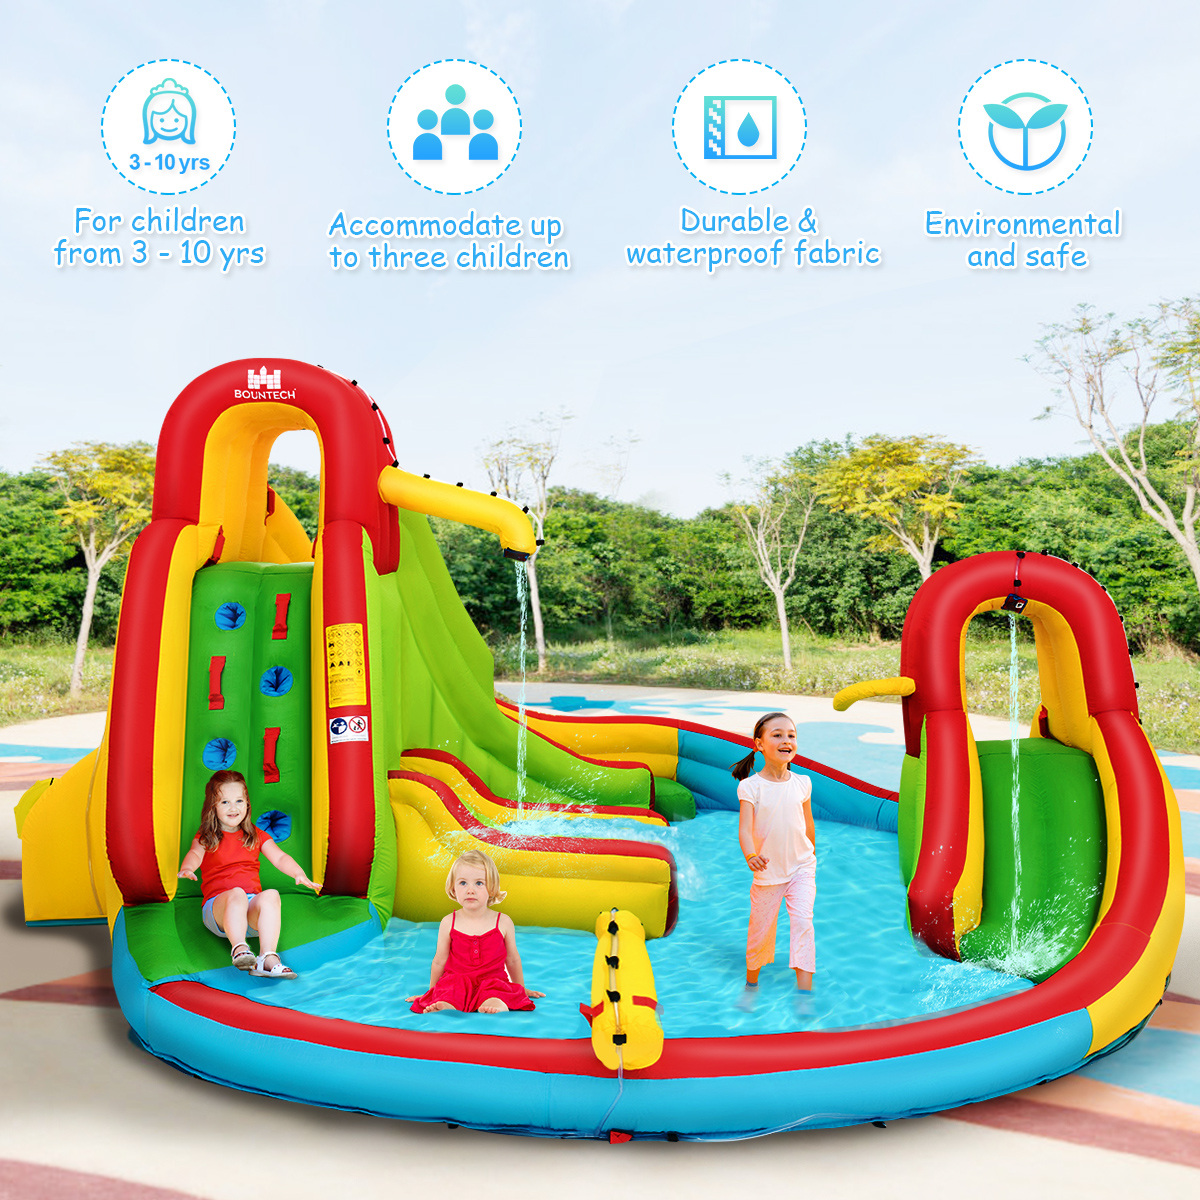 Costway Kids Inflatable Water Slide Bounce Park Splash Pool with Water Cannon & 480W Blower - image 6 of 10